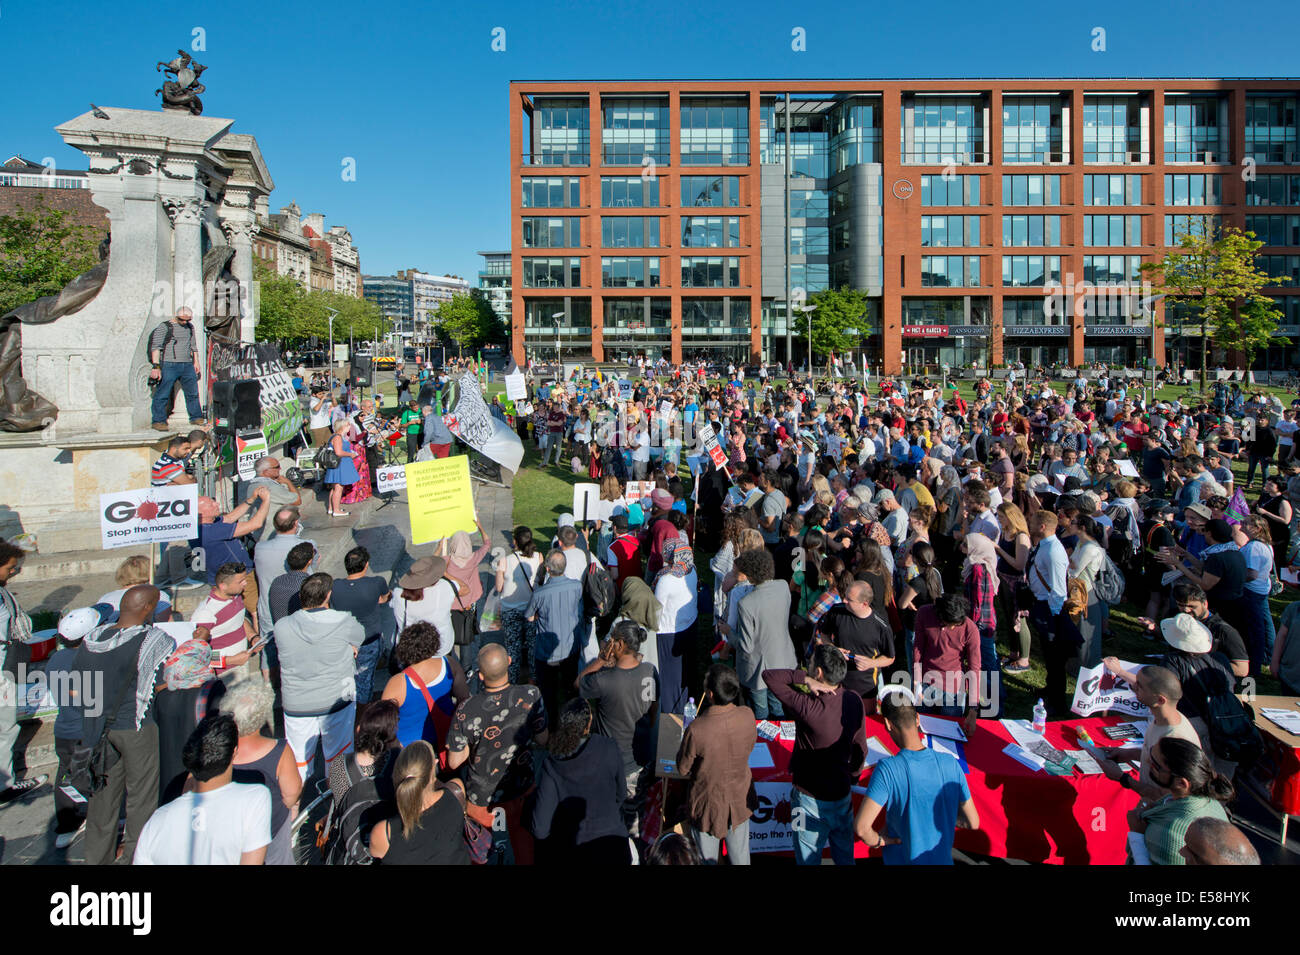 Manchester, UK. 23rd July, 2014. Hundreds of people attend a demonstration in the Piccadilly Gardens area of Manchester to protest over Israel's military actions in the Gaza Strip. Israel's actions have also been condemned by UN human rights official, Navi Pillay. Credit:  Russell Hart/Alamy Live News. Stock Photo